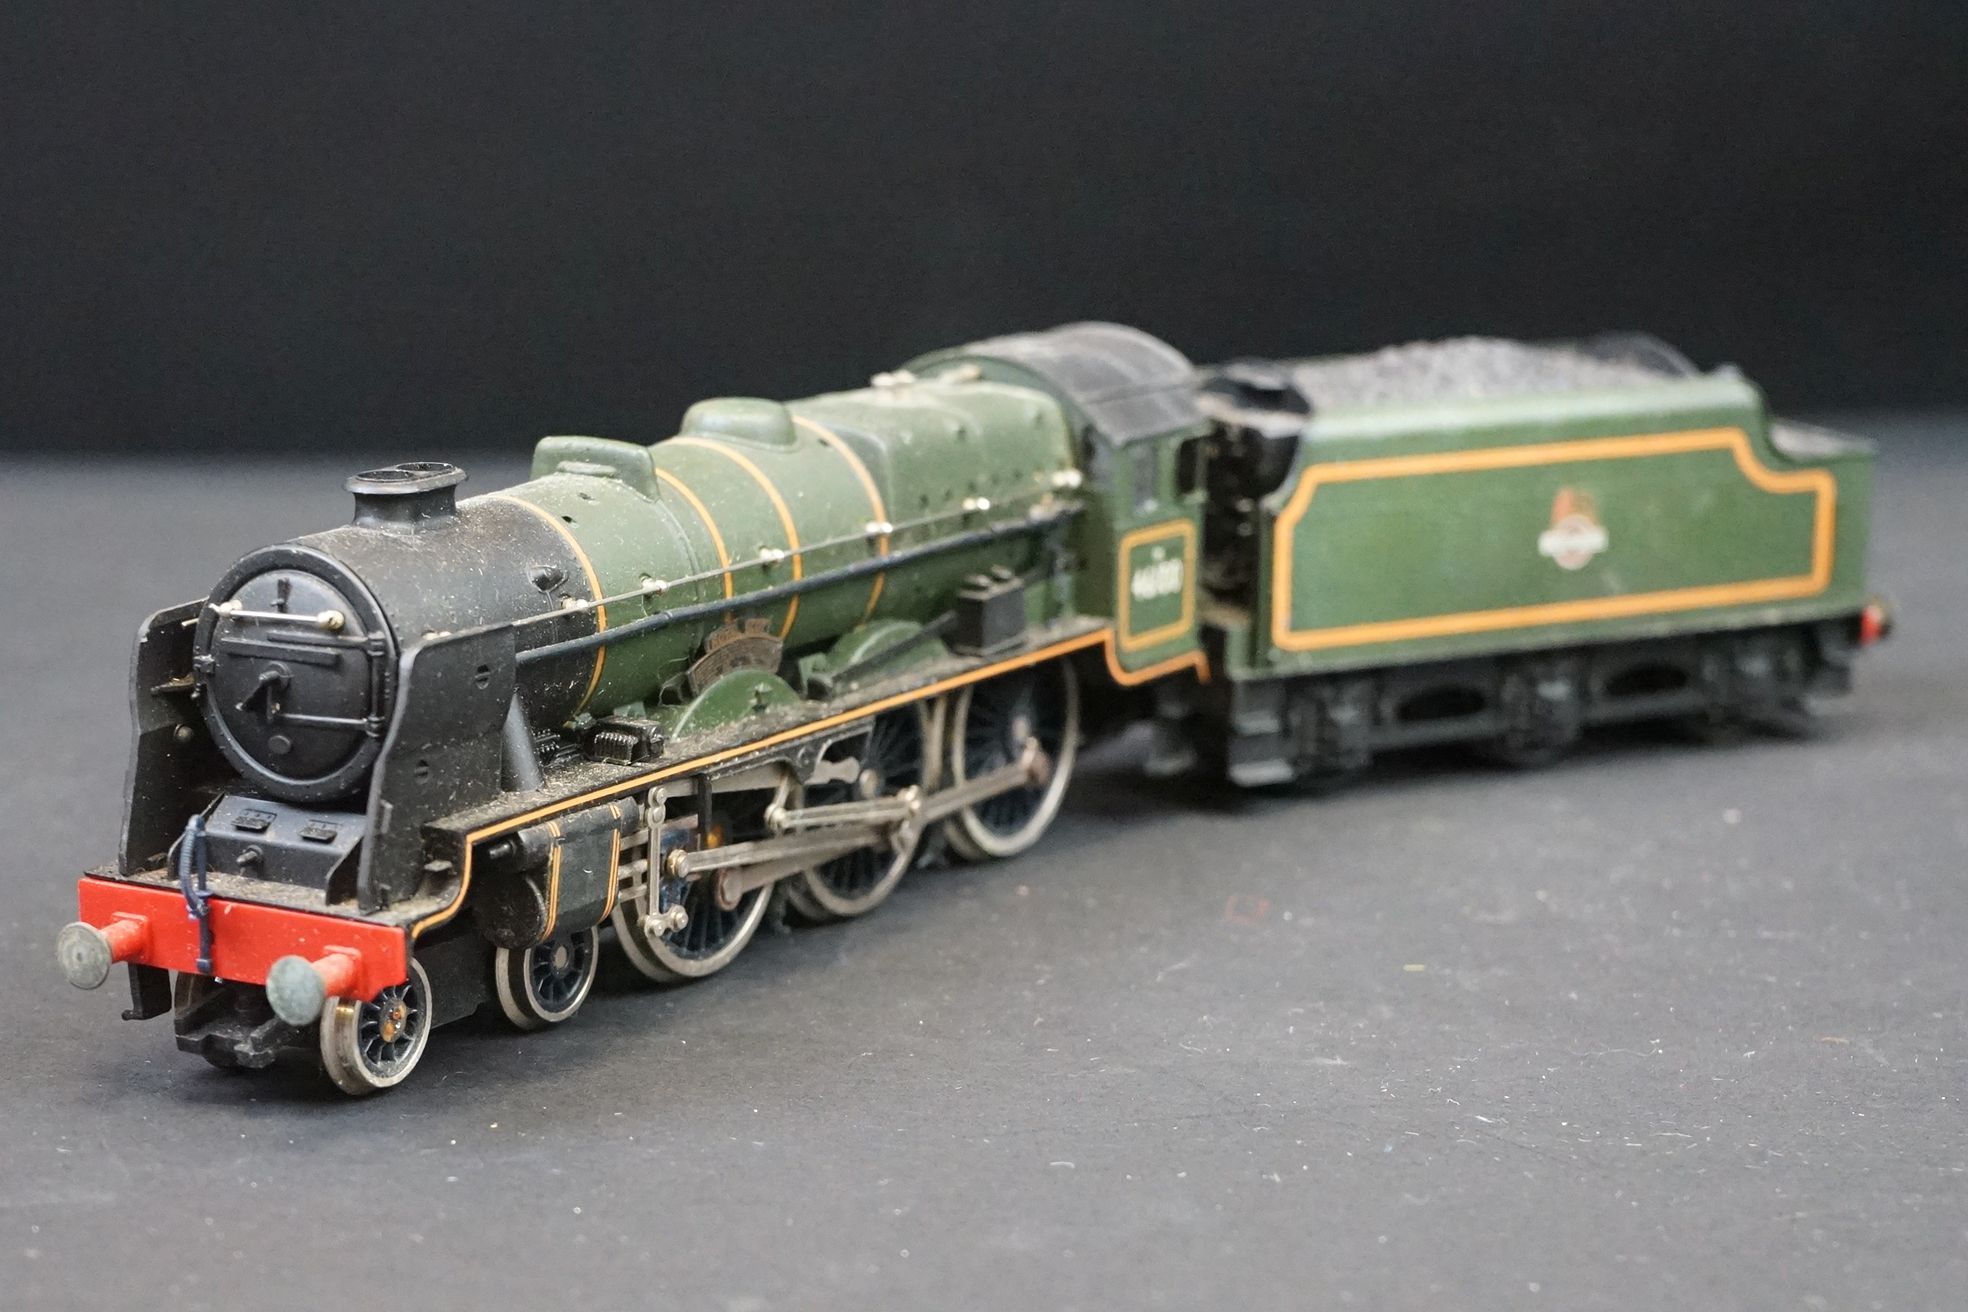 13 OO gauge locomotives to include Hornby, Lima & Airfix featuring Hornby Dublo 2-8-0LMS in black, - Image 7 of 12